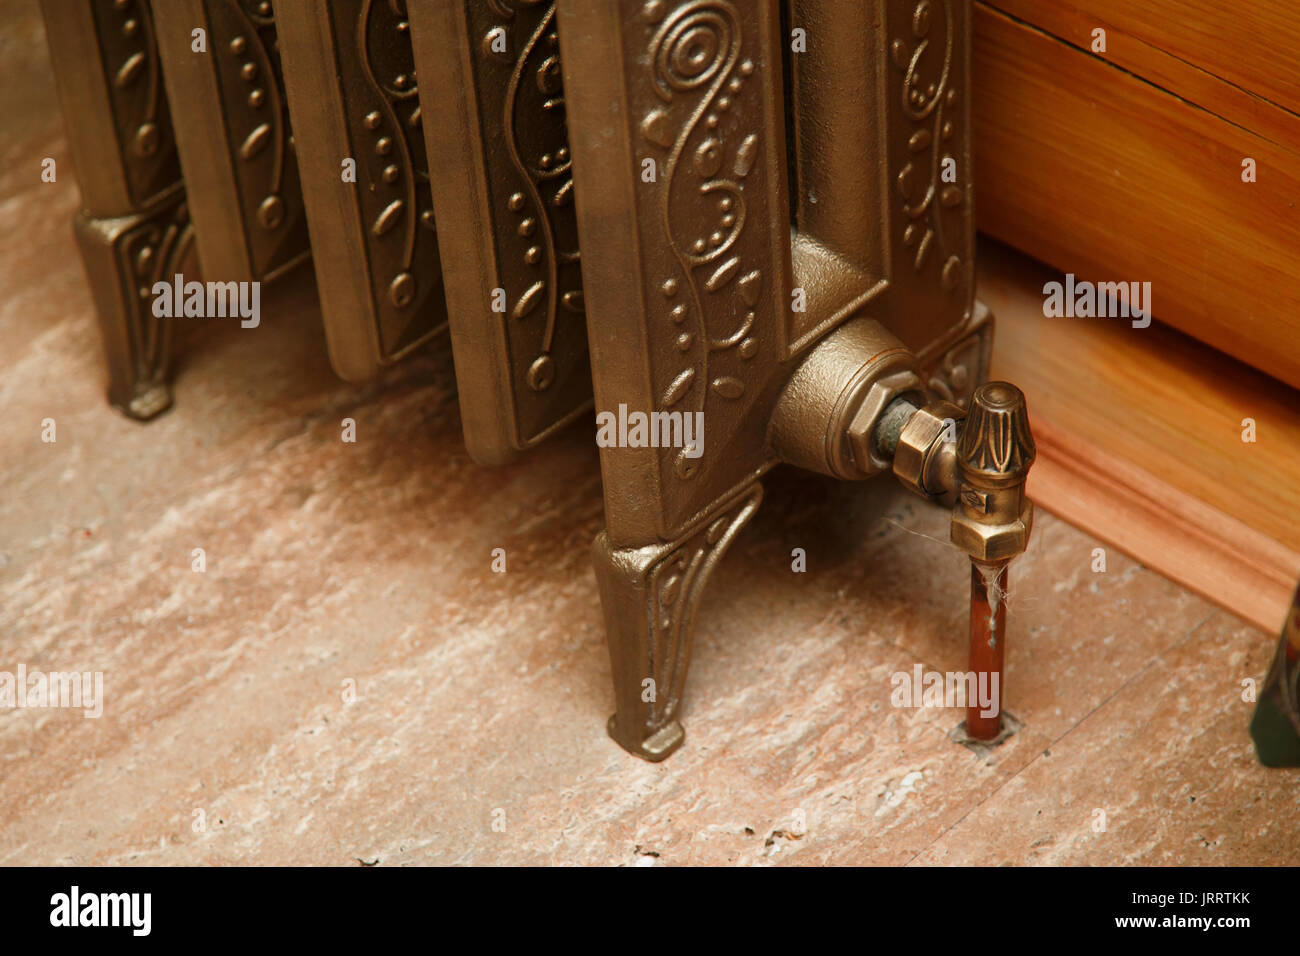 Retro styled cast iron radiator with valve and copper pipe. Close up Stock Photo